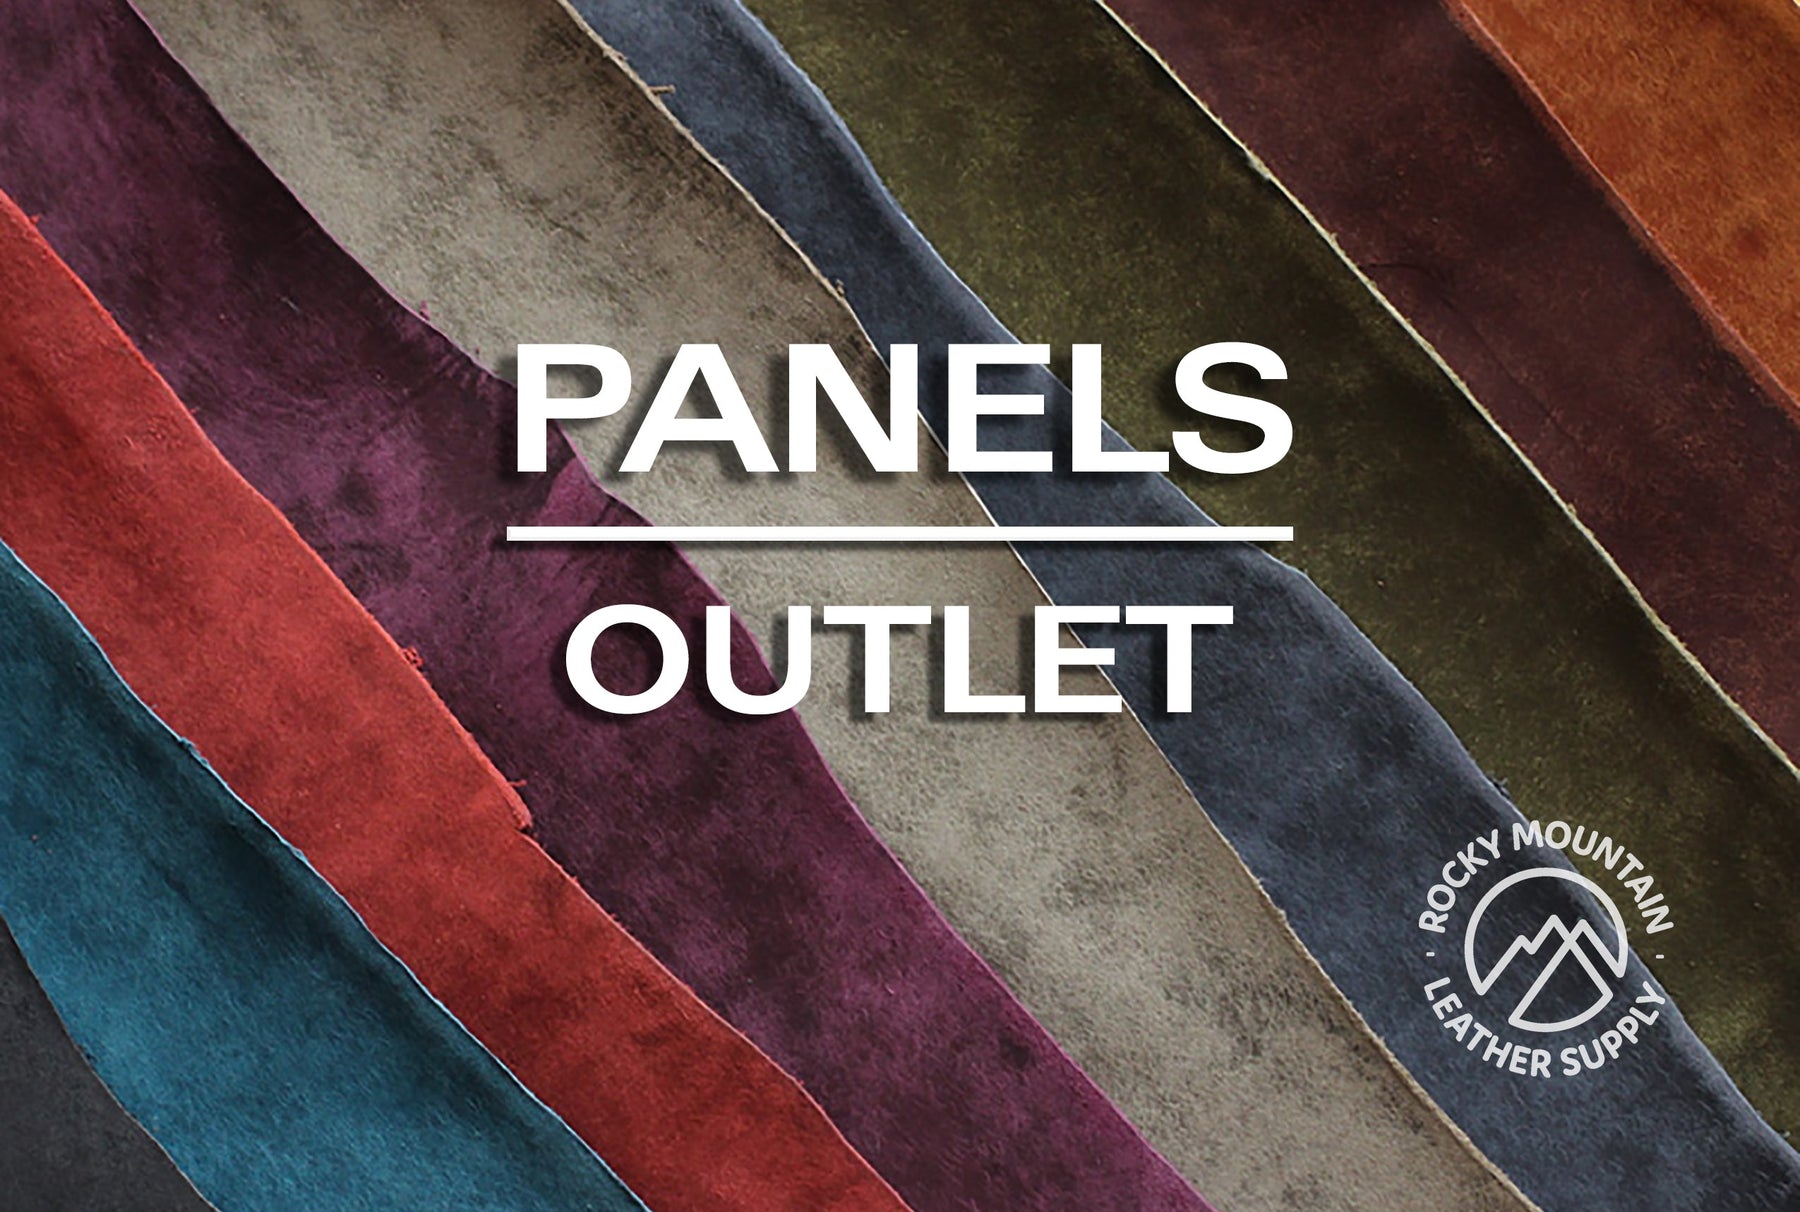 Discount - Wickett and Craig - Leather Panels (OUTLET) - Up to 60% Off